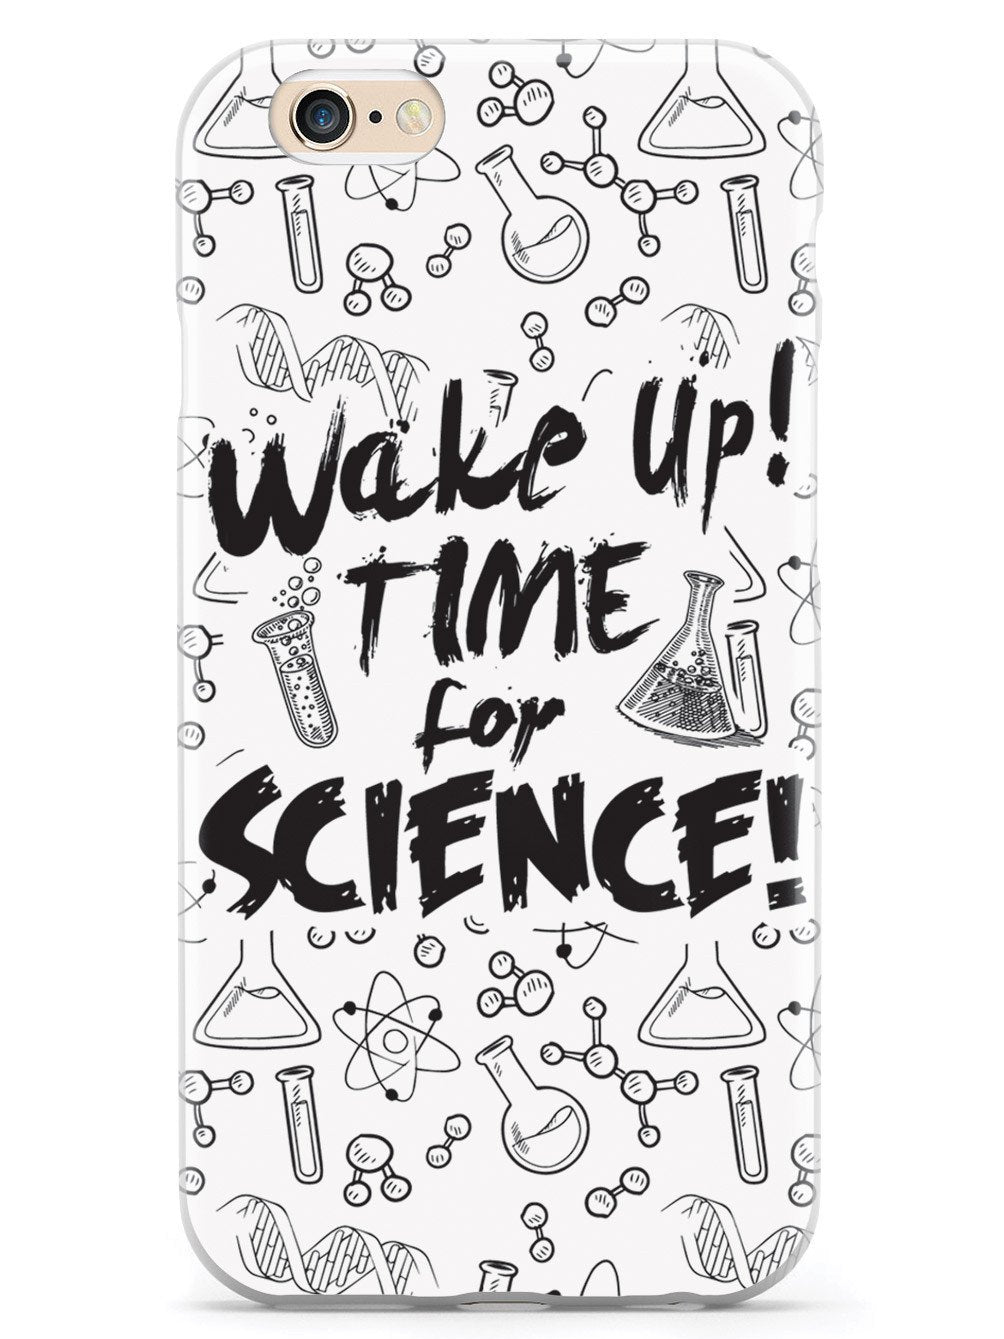 WAKE UP! Time For Science! - White Case